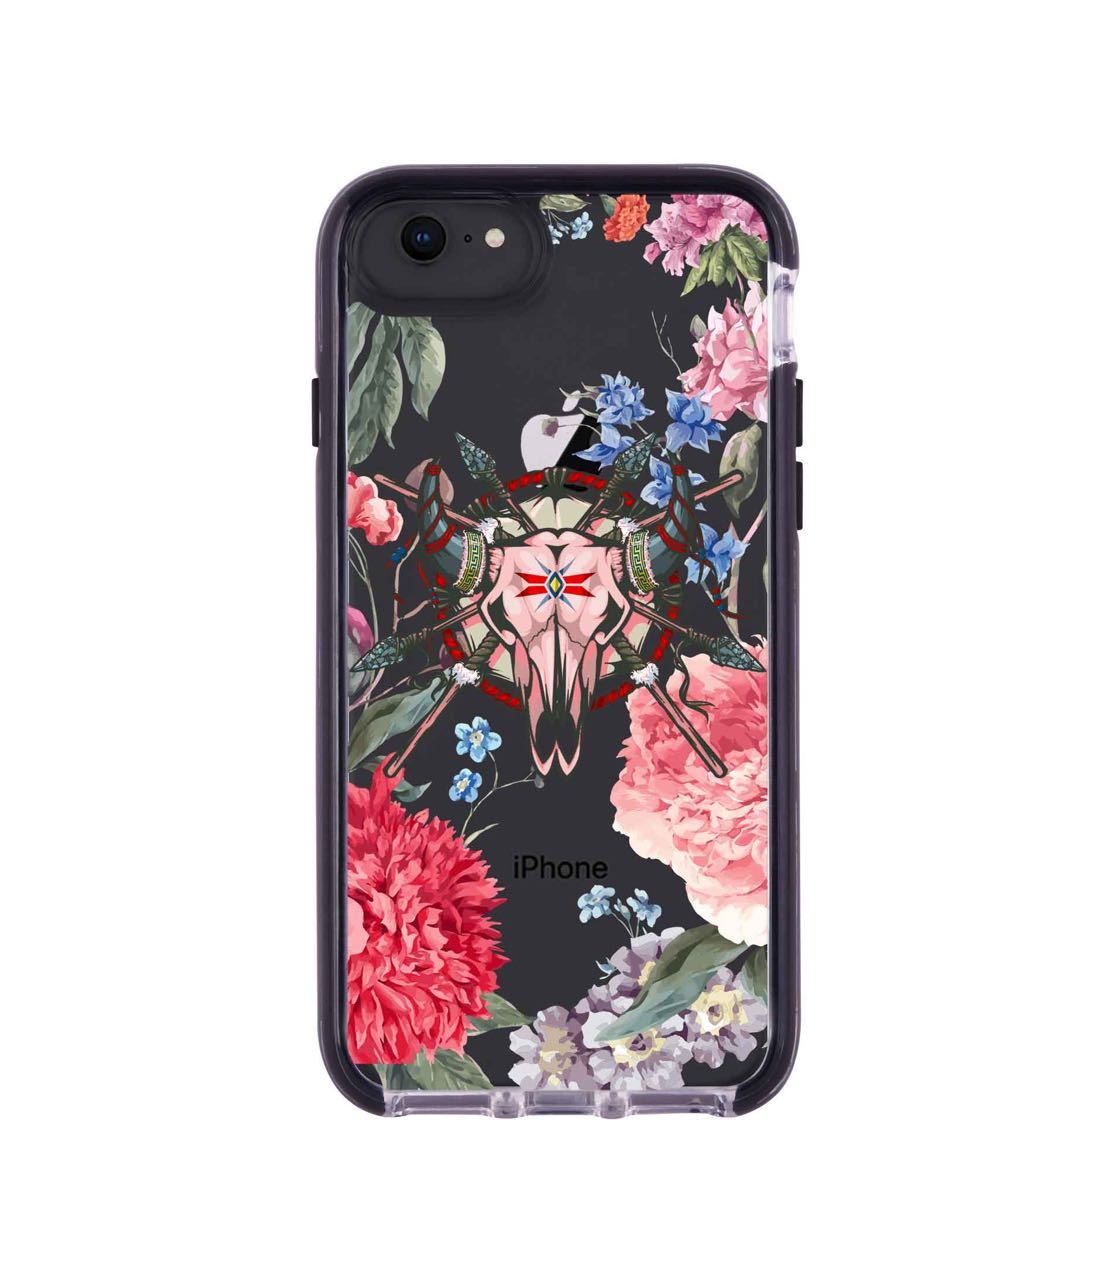 Floral Symmetry - Extreme Phone Case for iPhone 8